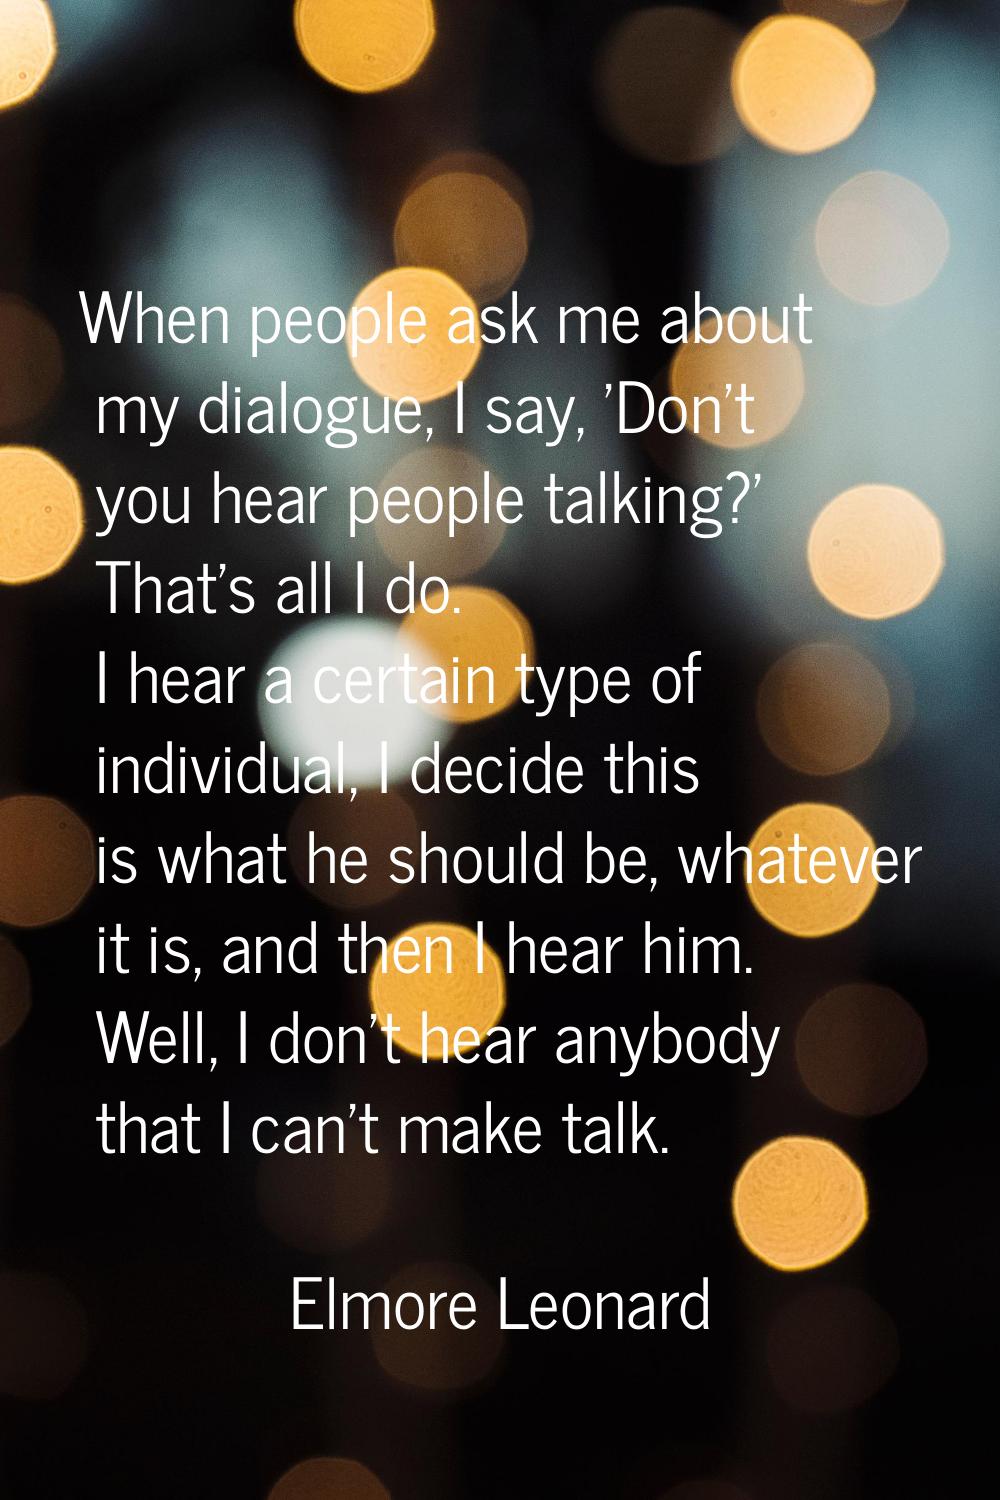 When people ask me about my dialogue, I say, 'Don't you hear people talking?' That's all I do. I he